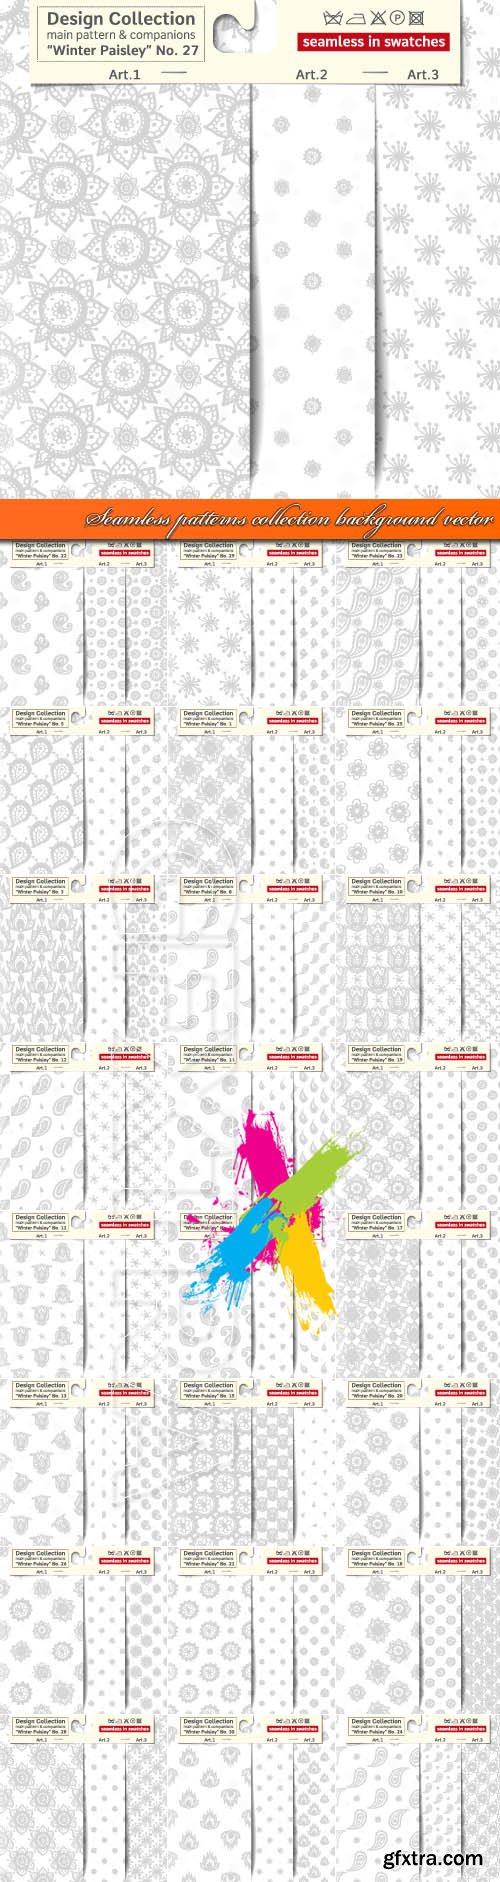 Seamless patterns collection background vector